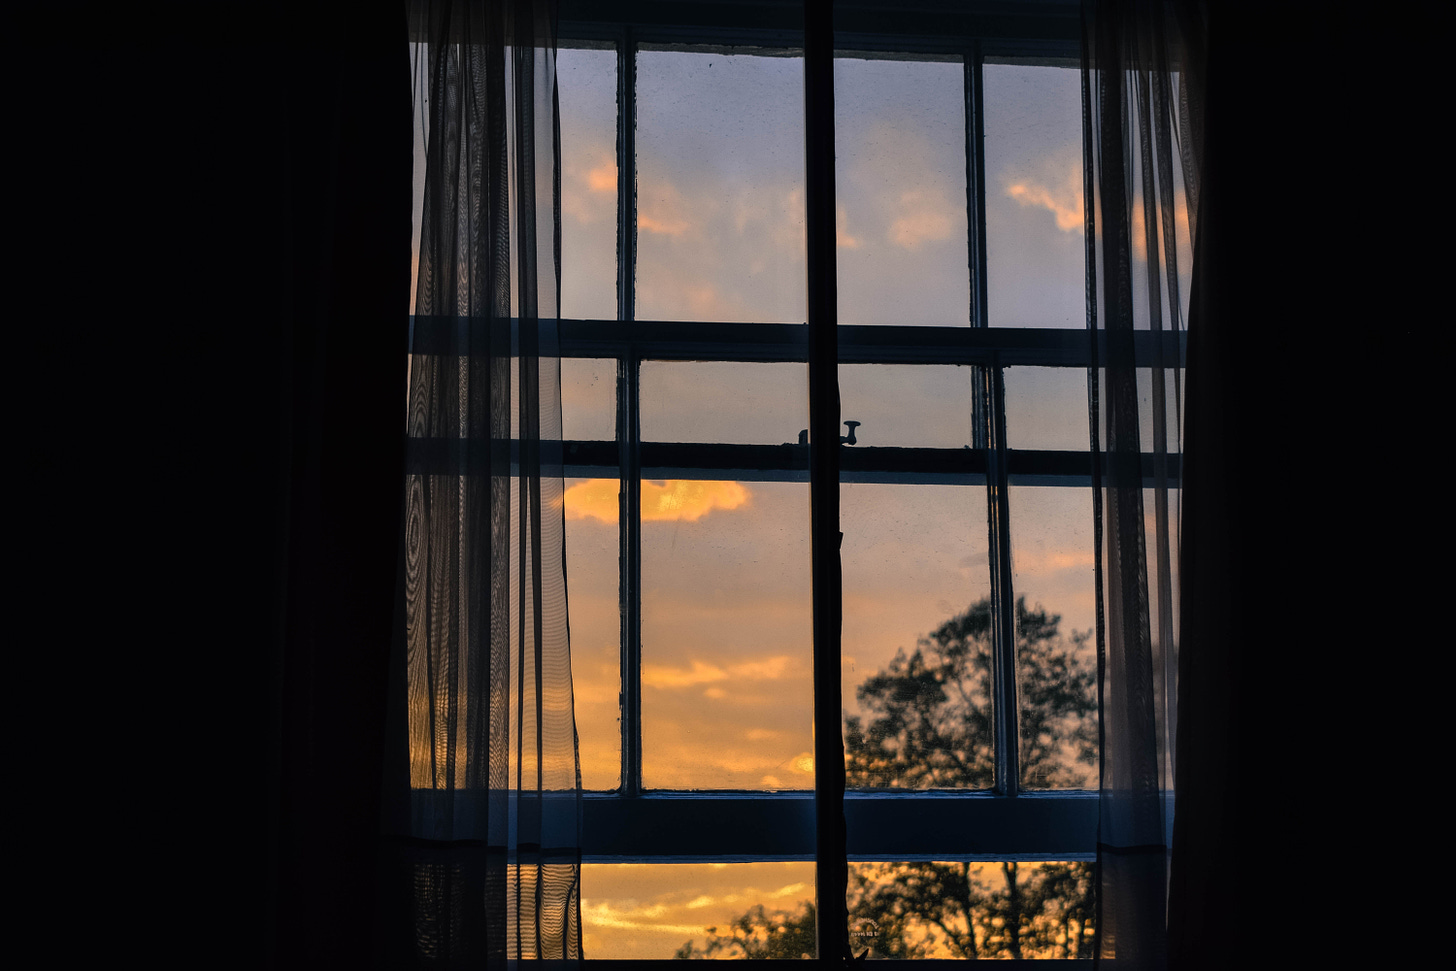 View from within a dark room, looking out an open window on a sunset scene. The sky shades from pale blue to gold.